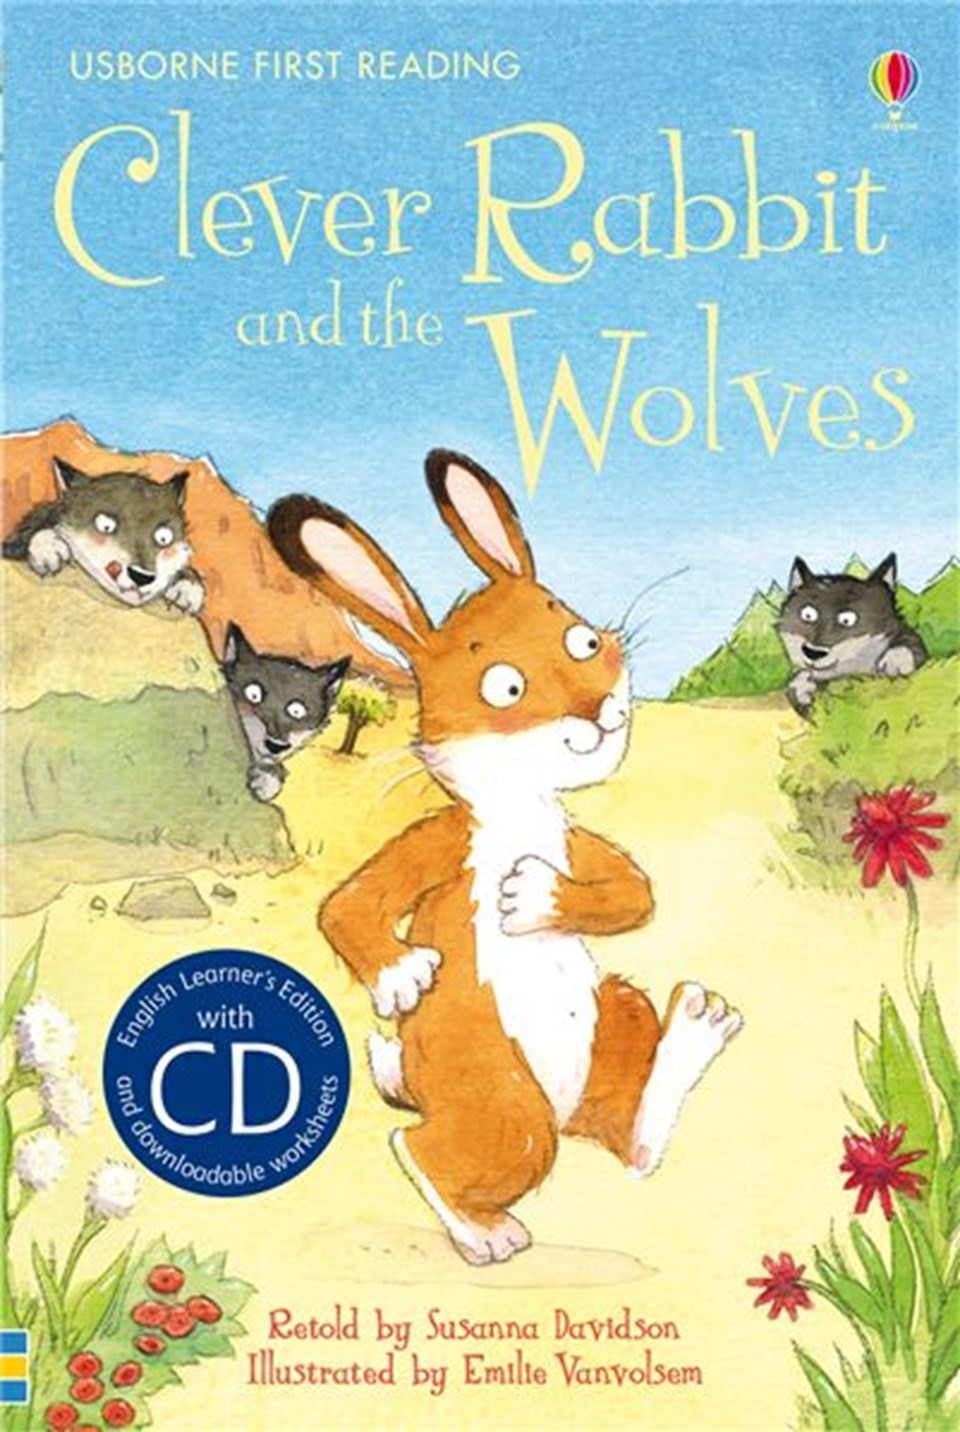 Clever Rabbit and the Wolves